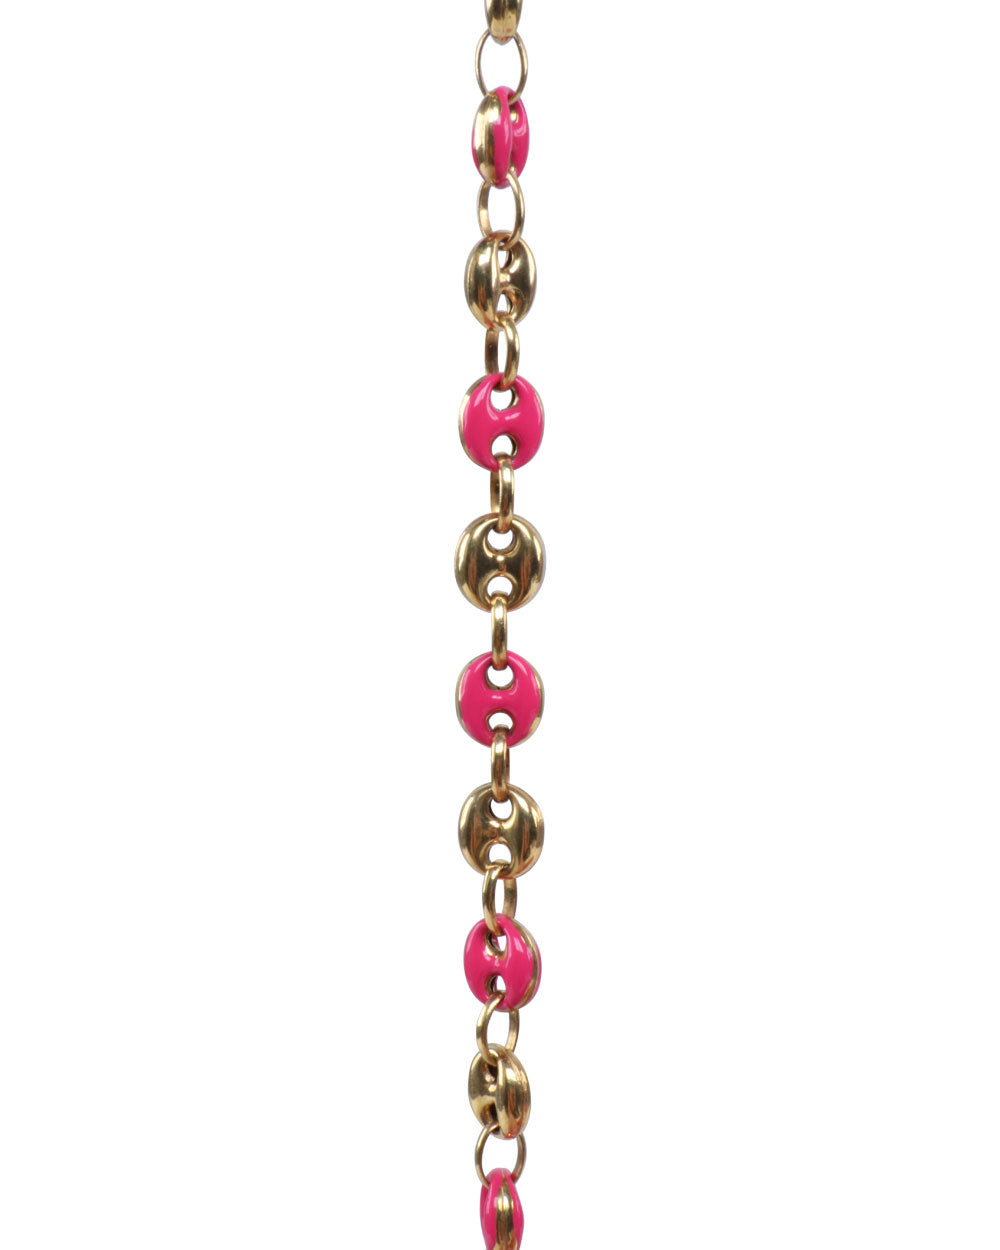 Gold and Pink Enamel Small Mariner Link Necklace